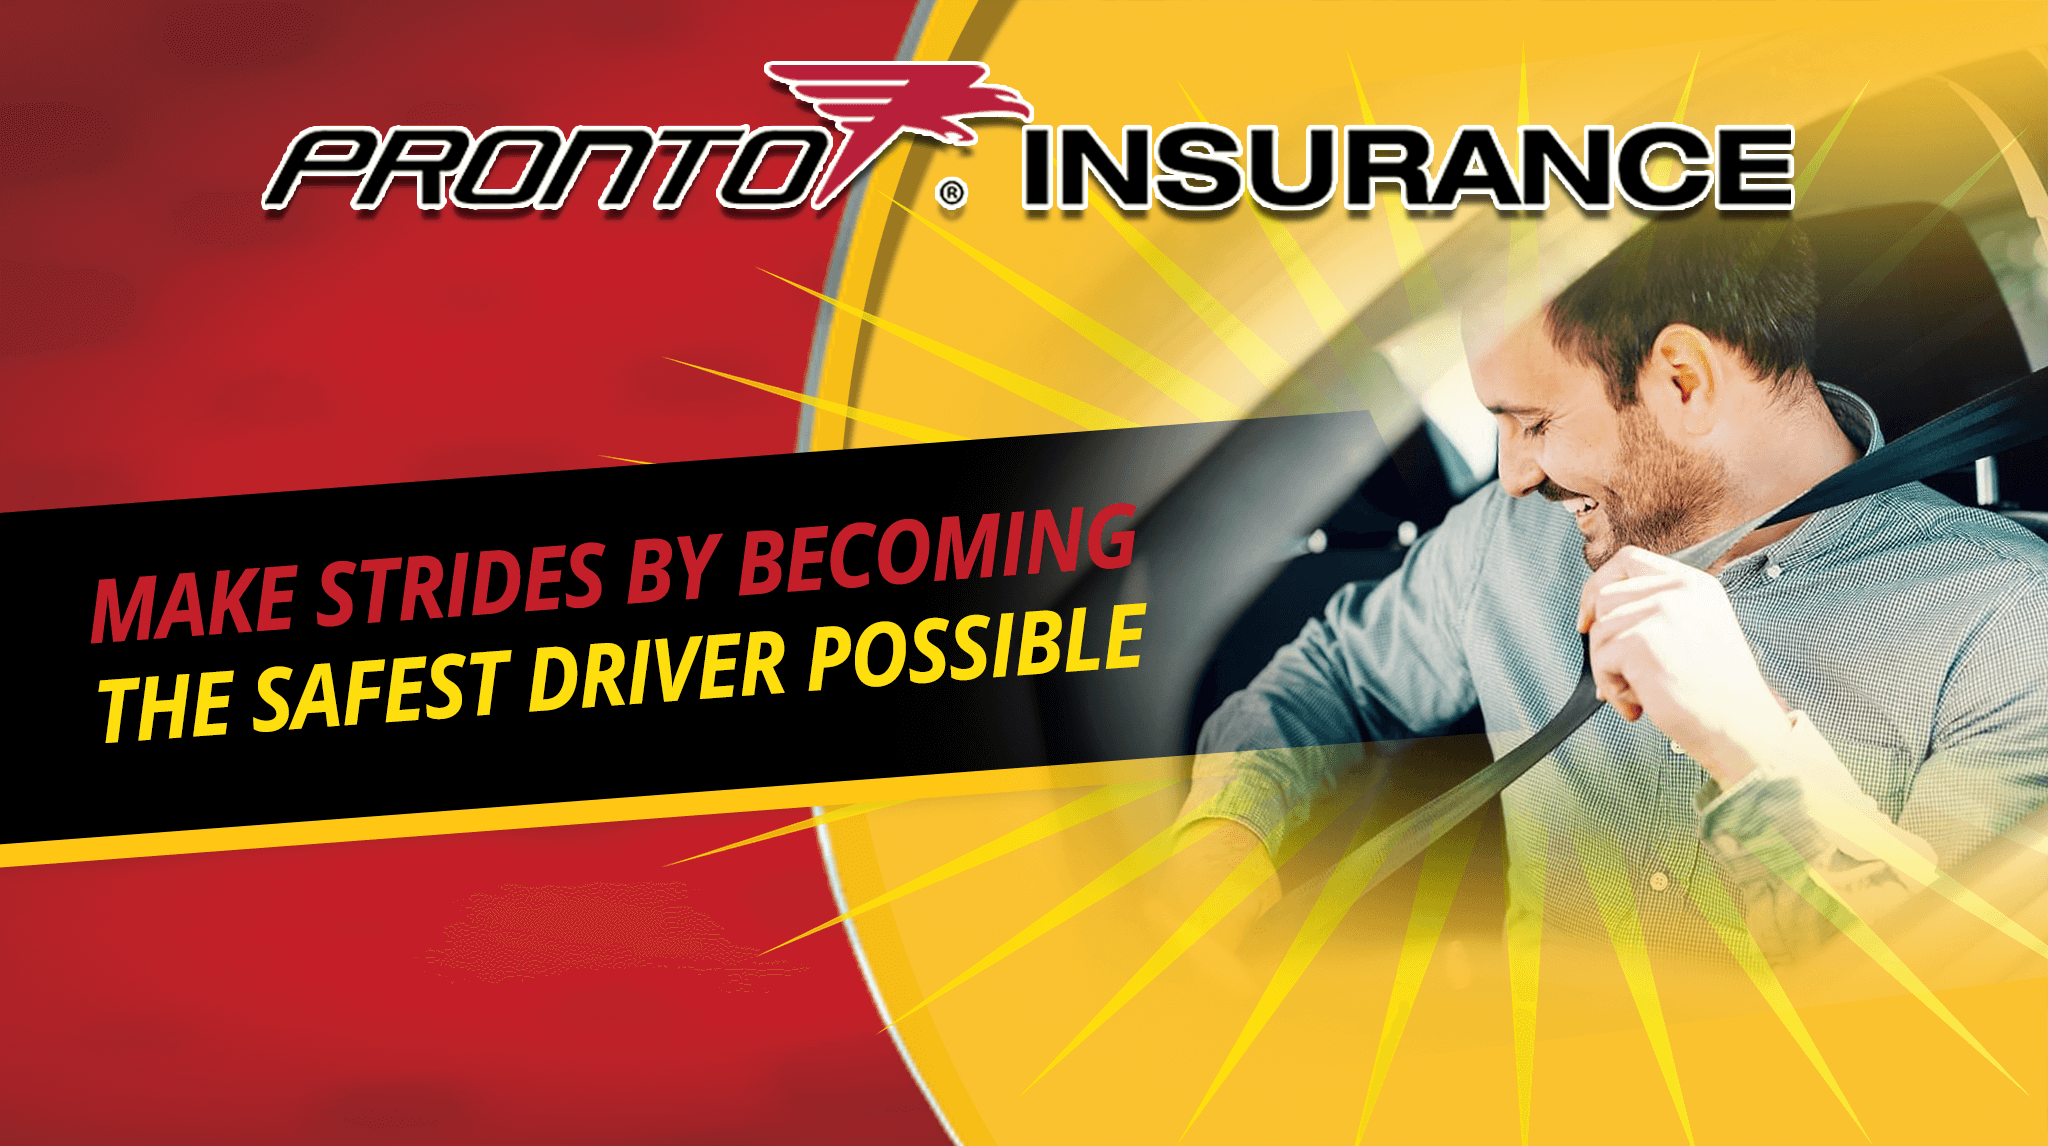 Make Strides by Becoming the Safest Driver Possible